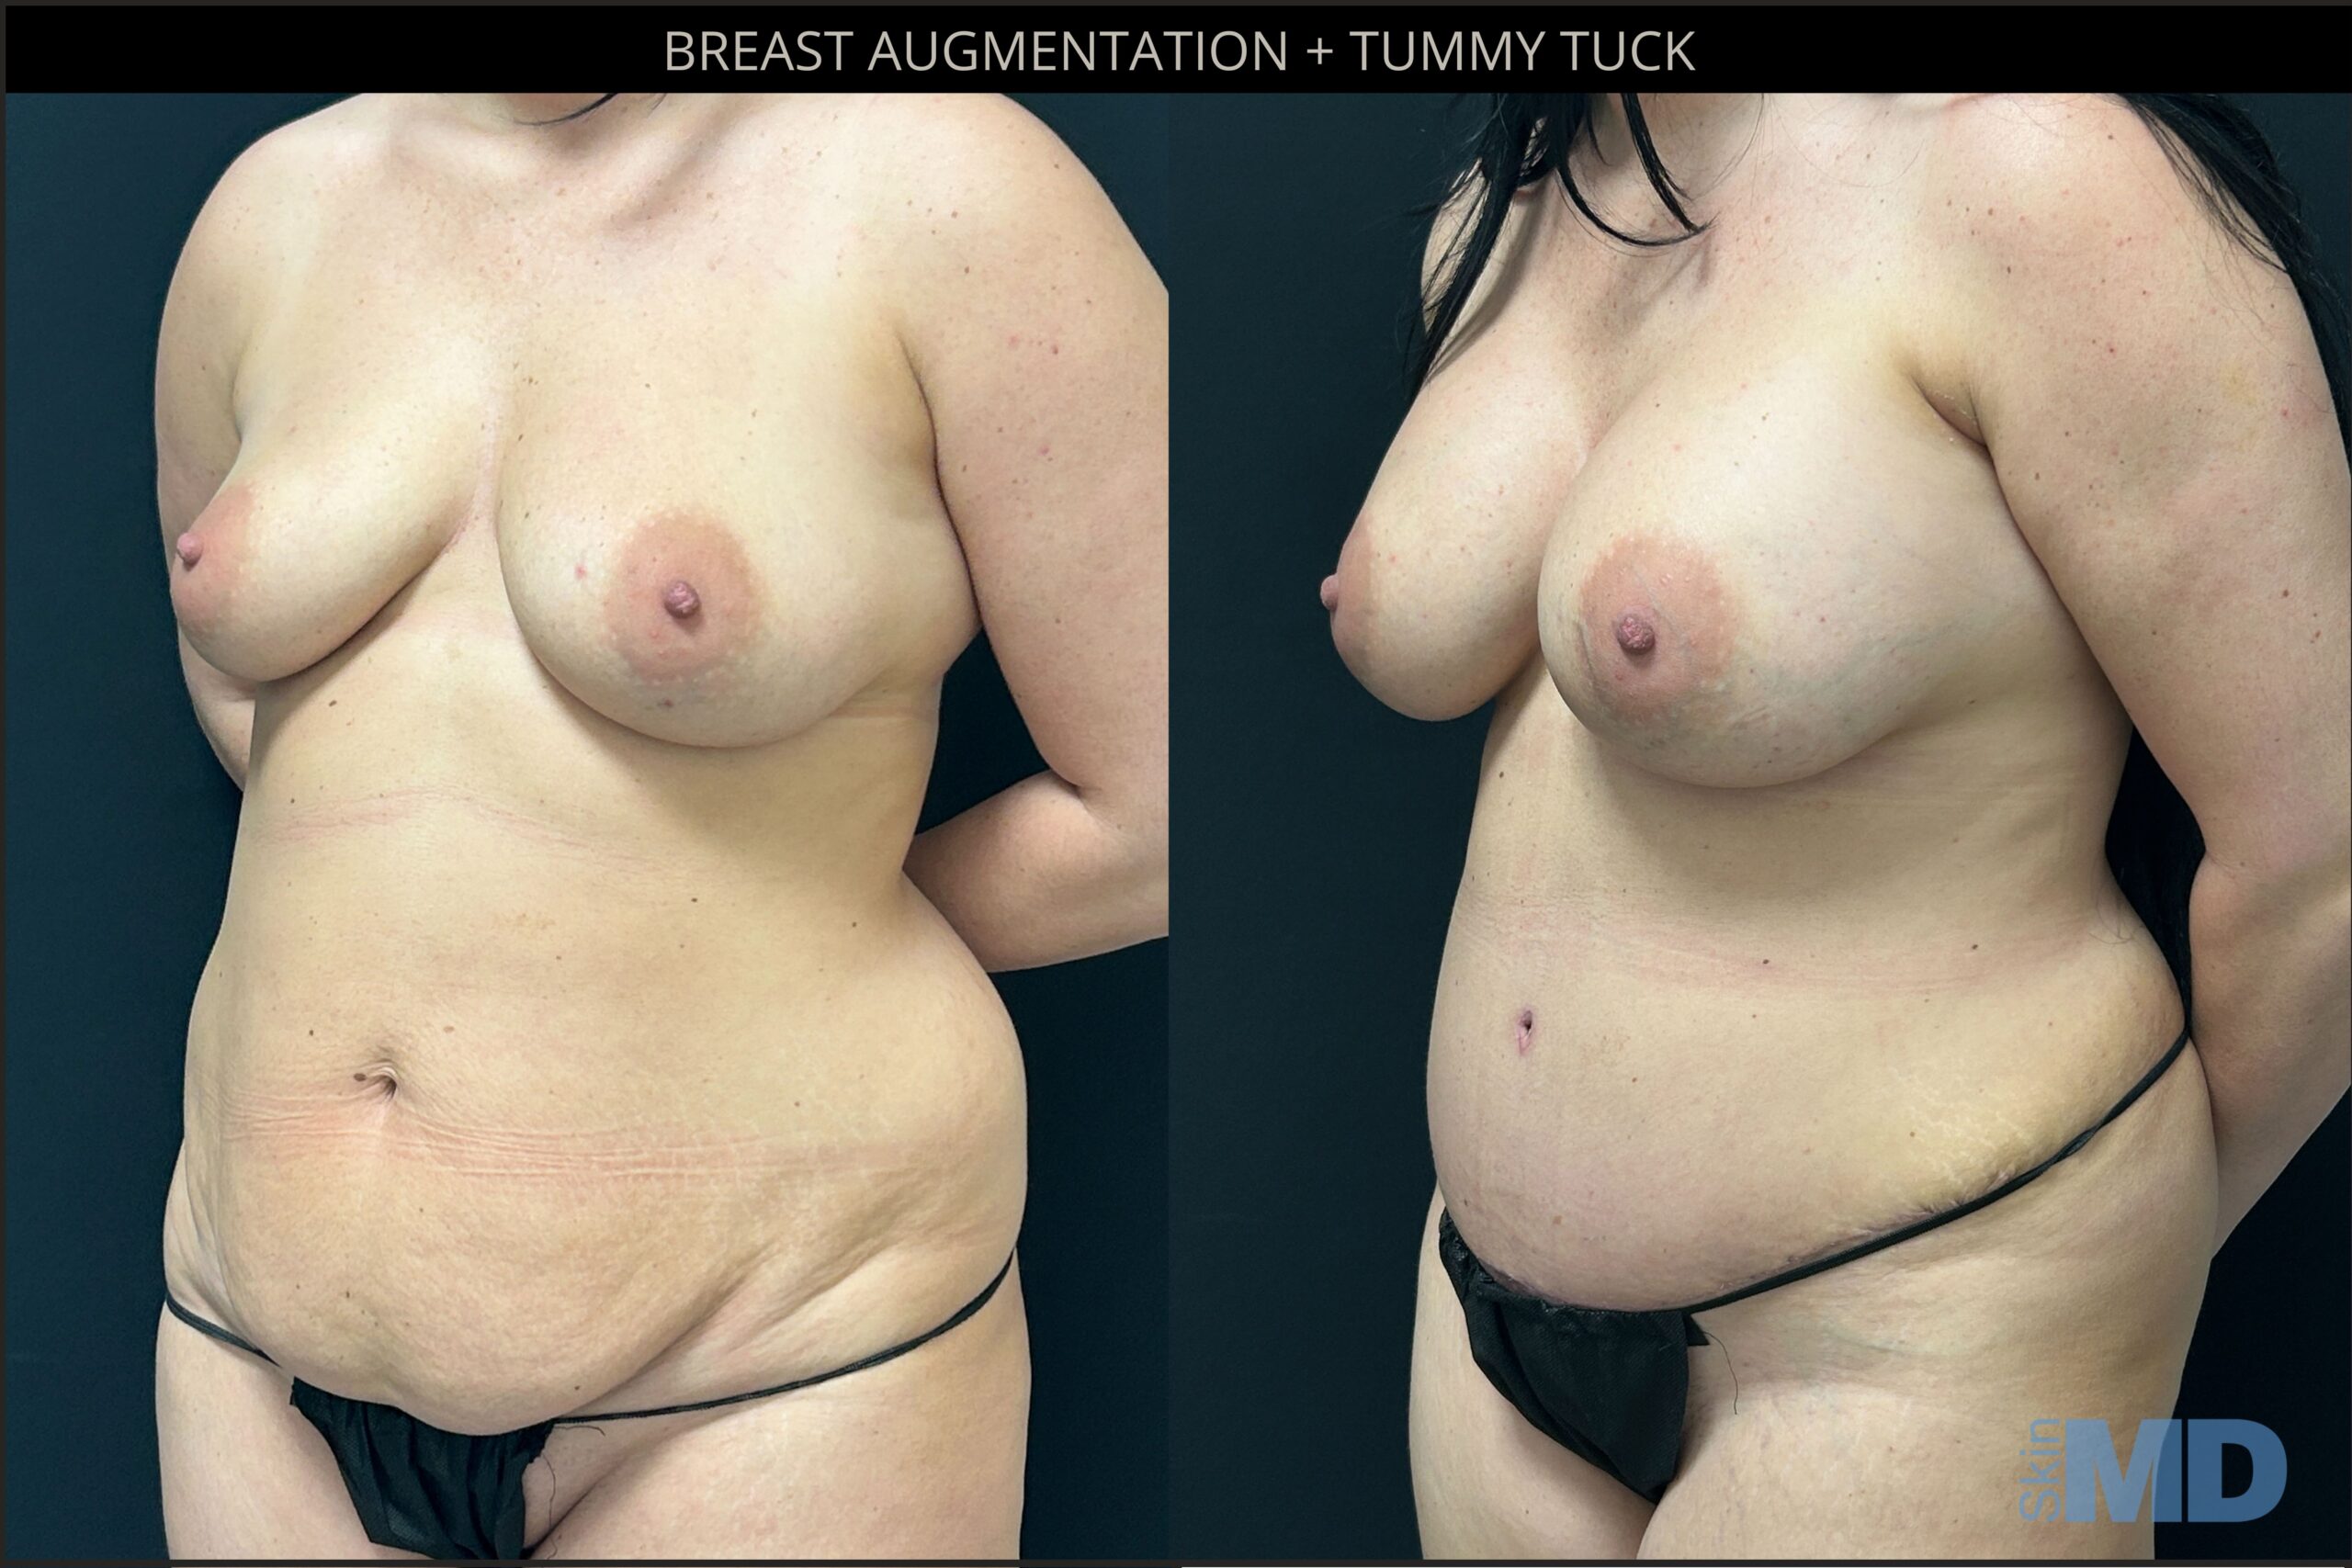 Before and after tummy tuck and breast augmentation results